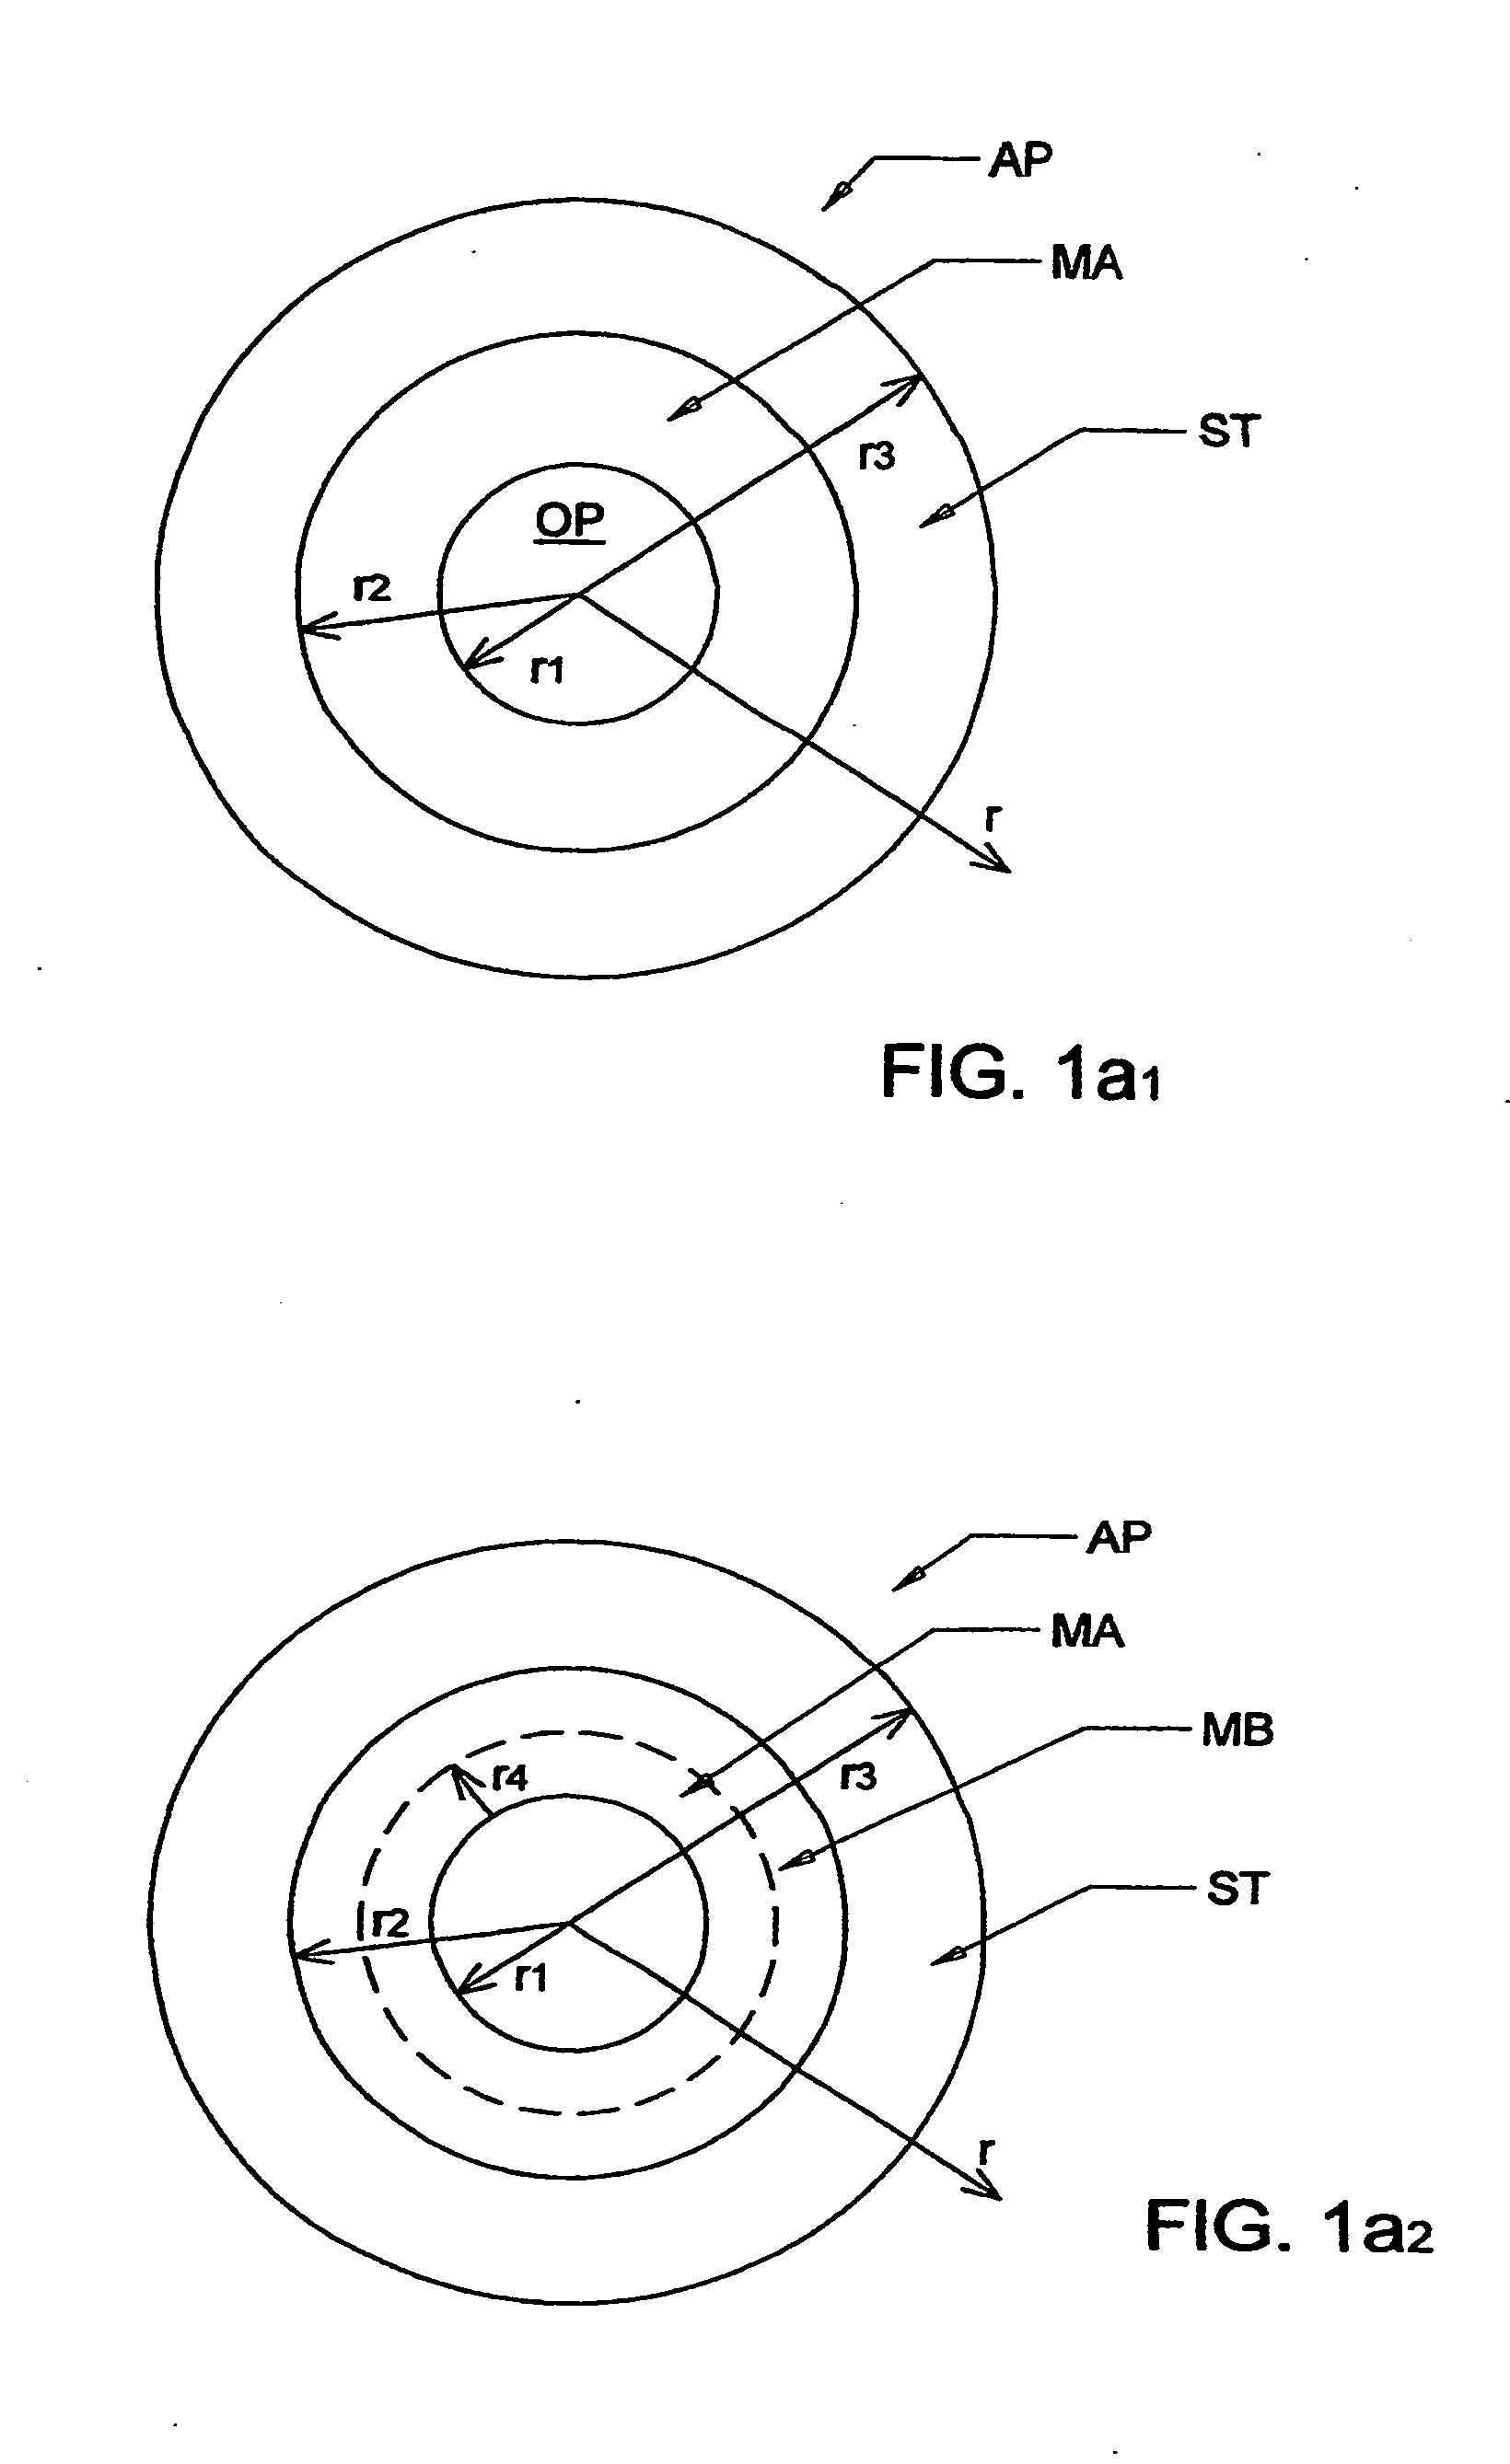 Operation of an electromagnetic radiation focusing element